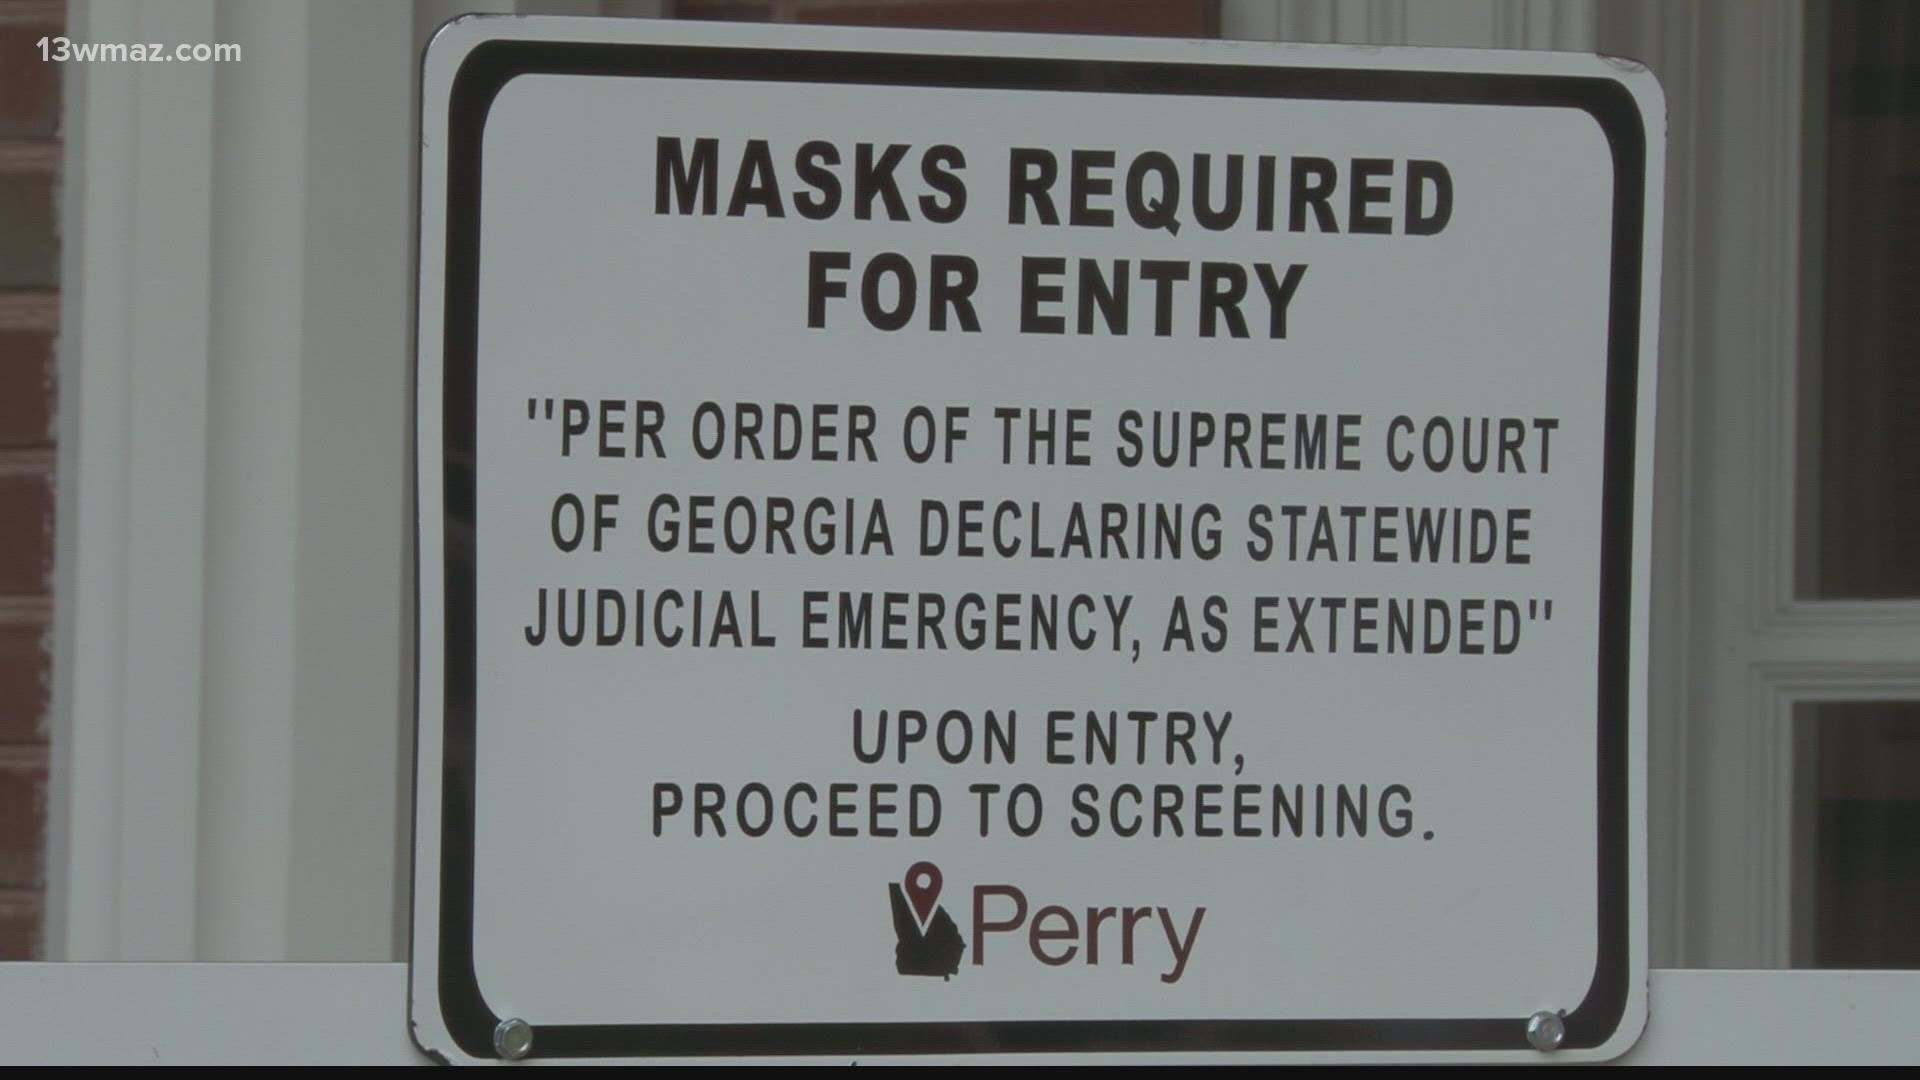 As COVID cases continue to climb in Houston county, the City of Perry is tightening its COVID-19 restrictions.